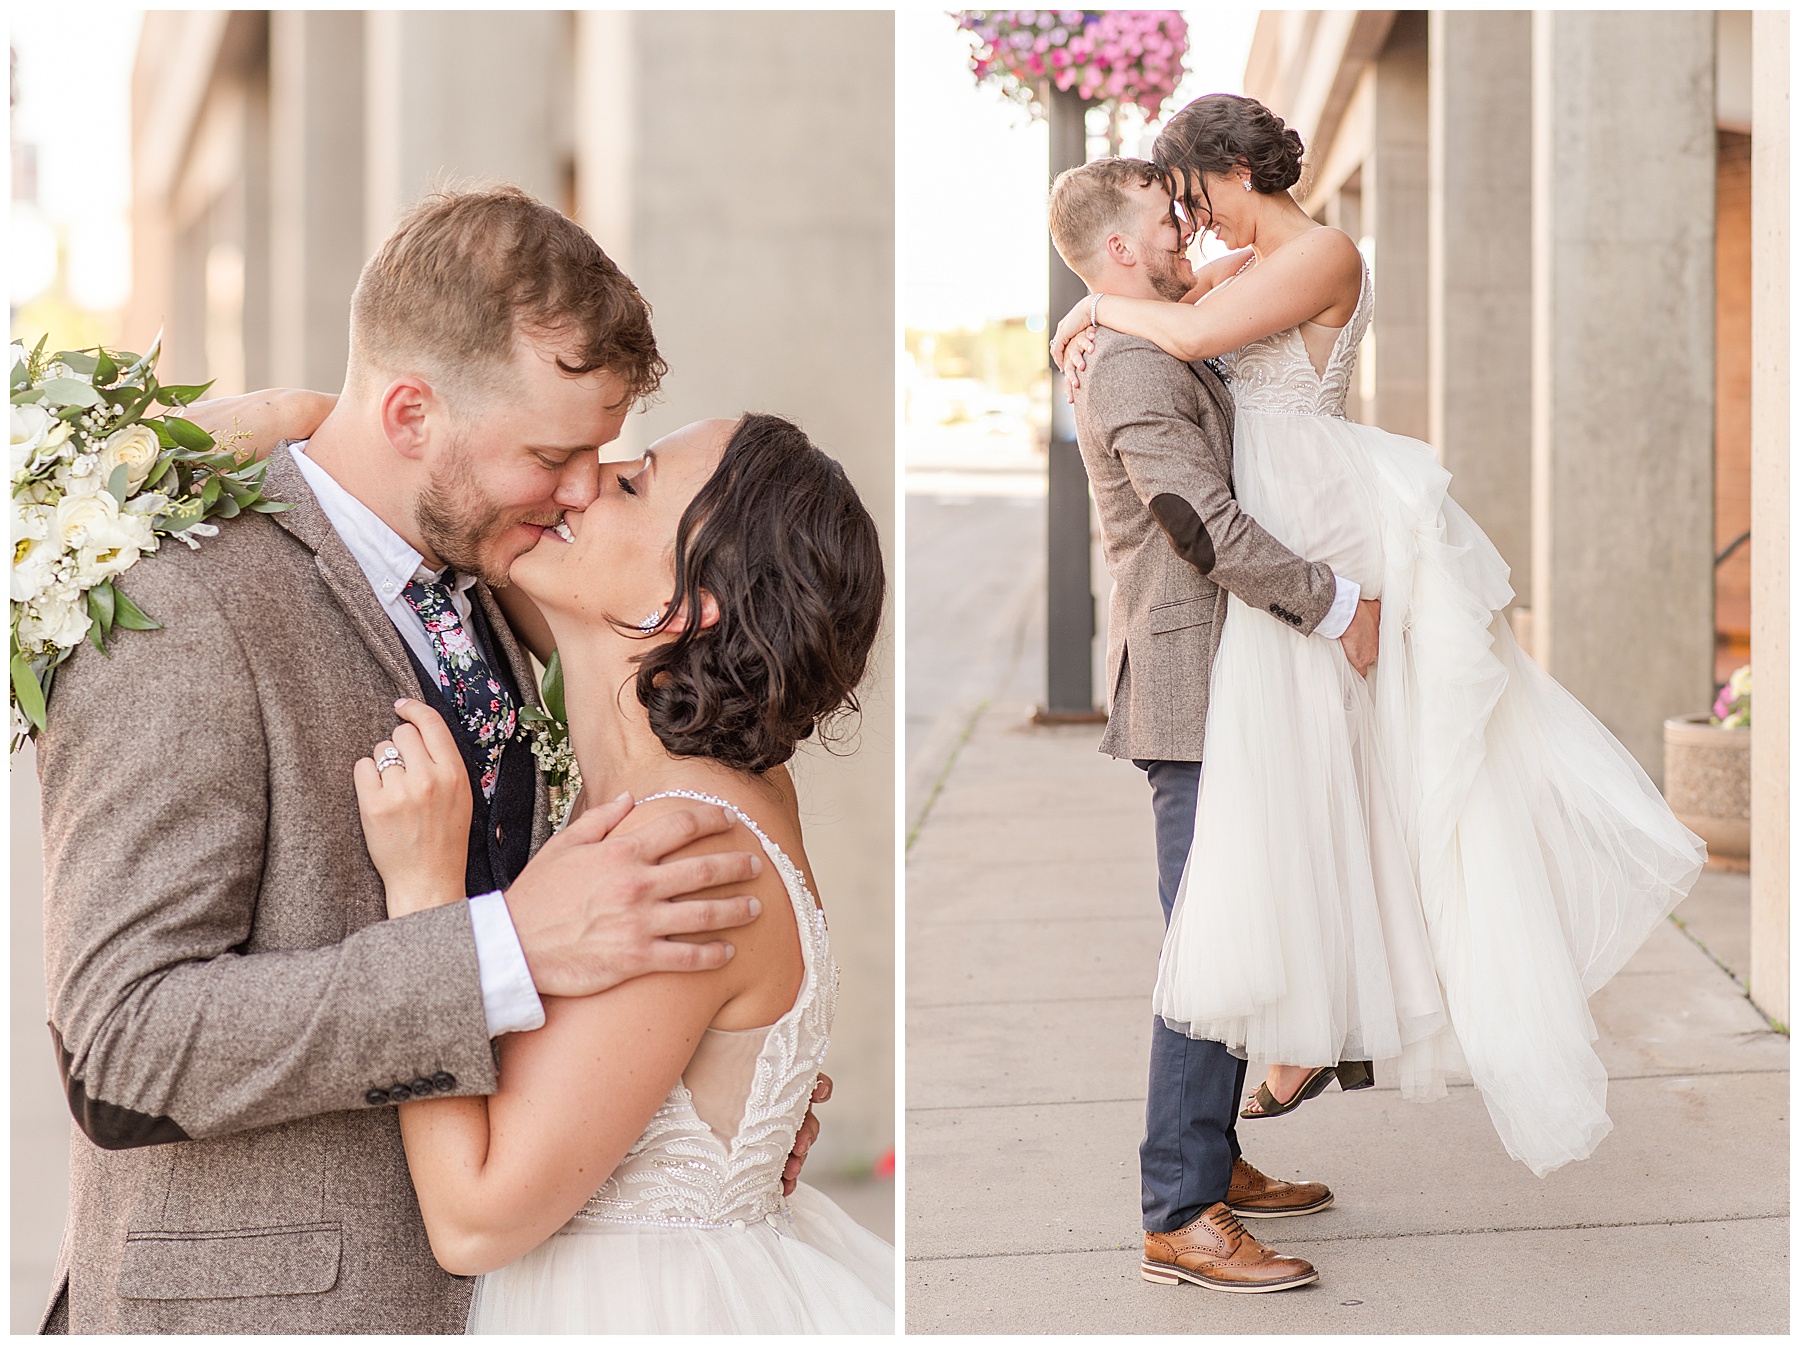 The Lismore Wedding in Eau Claire, WI